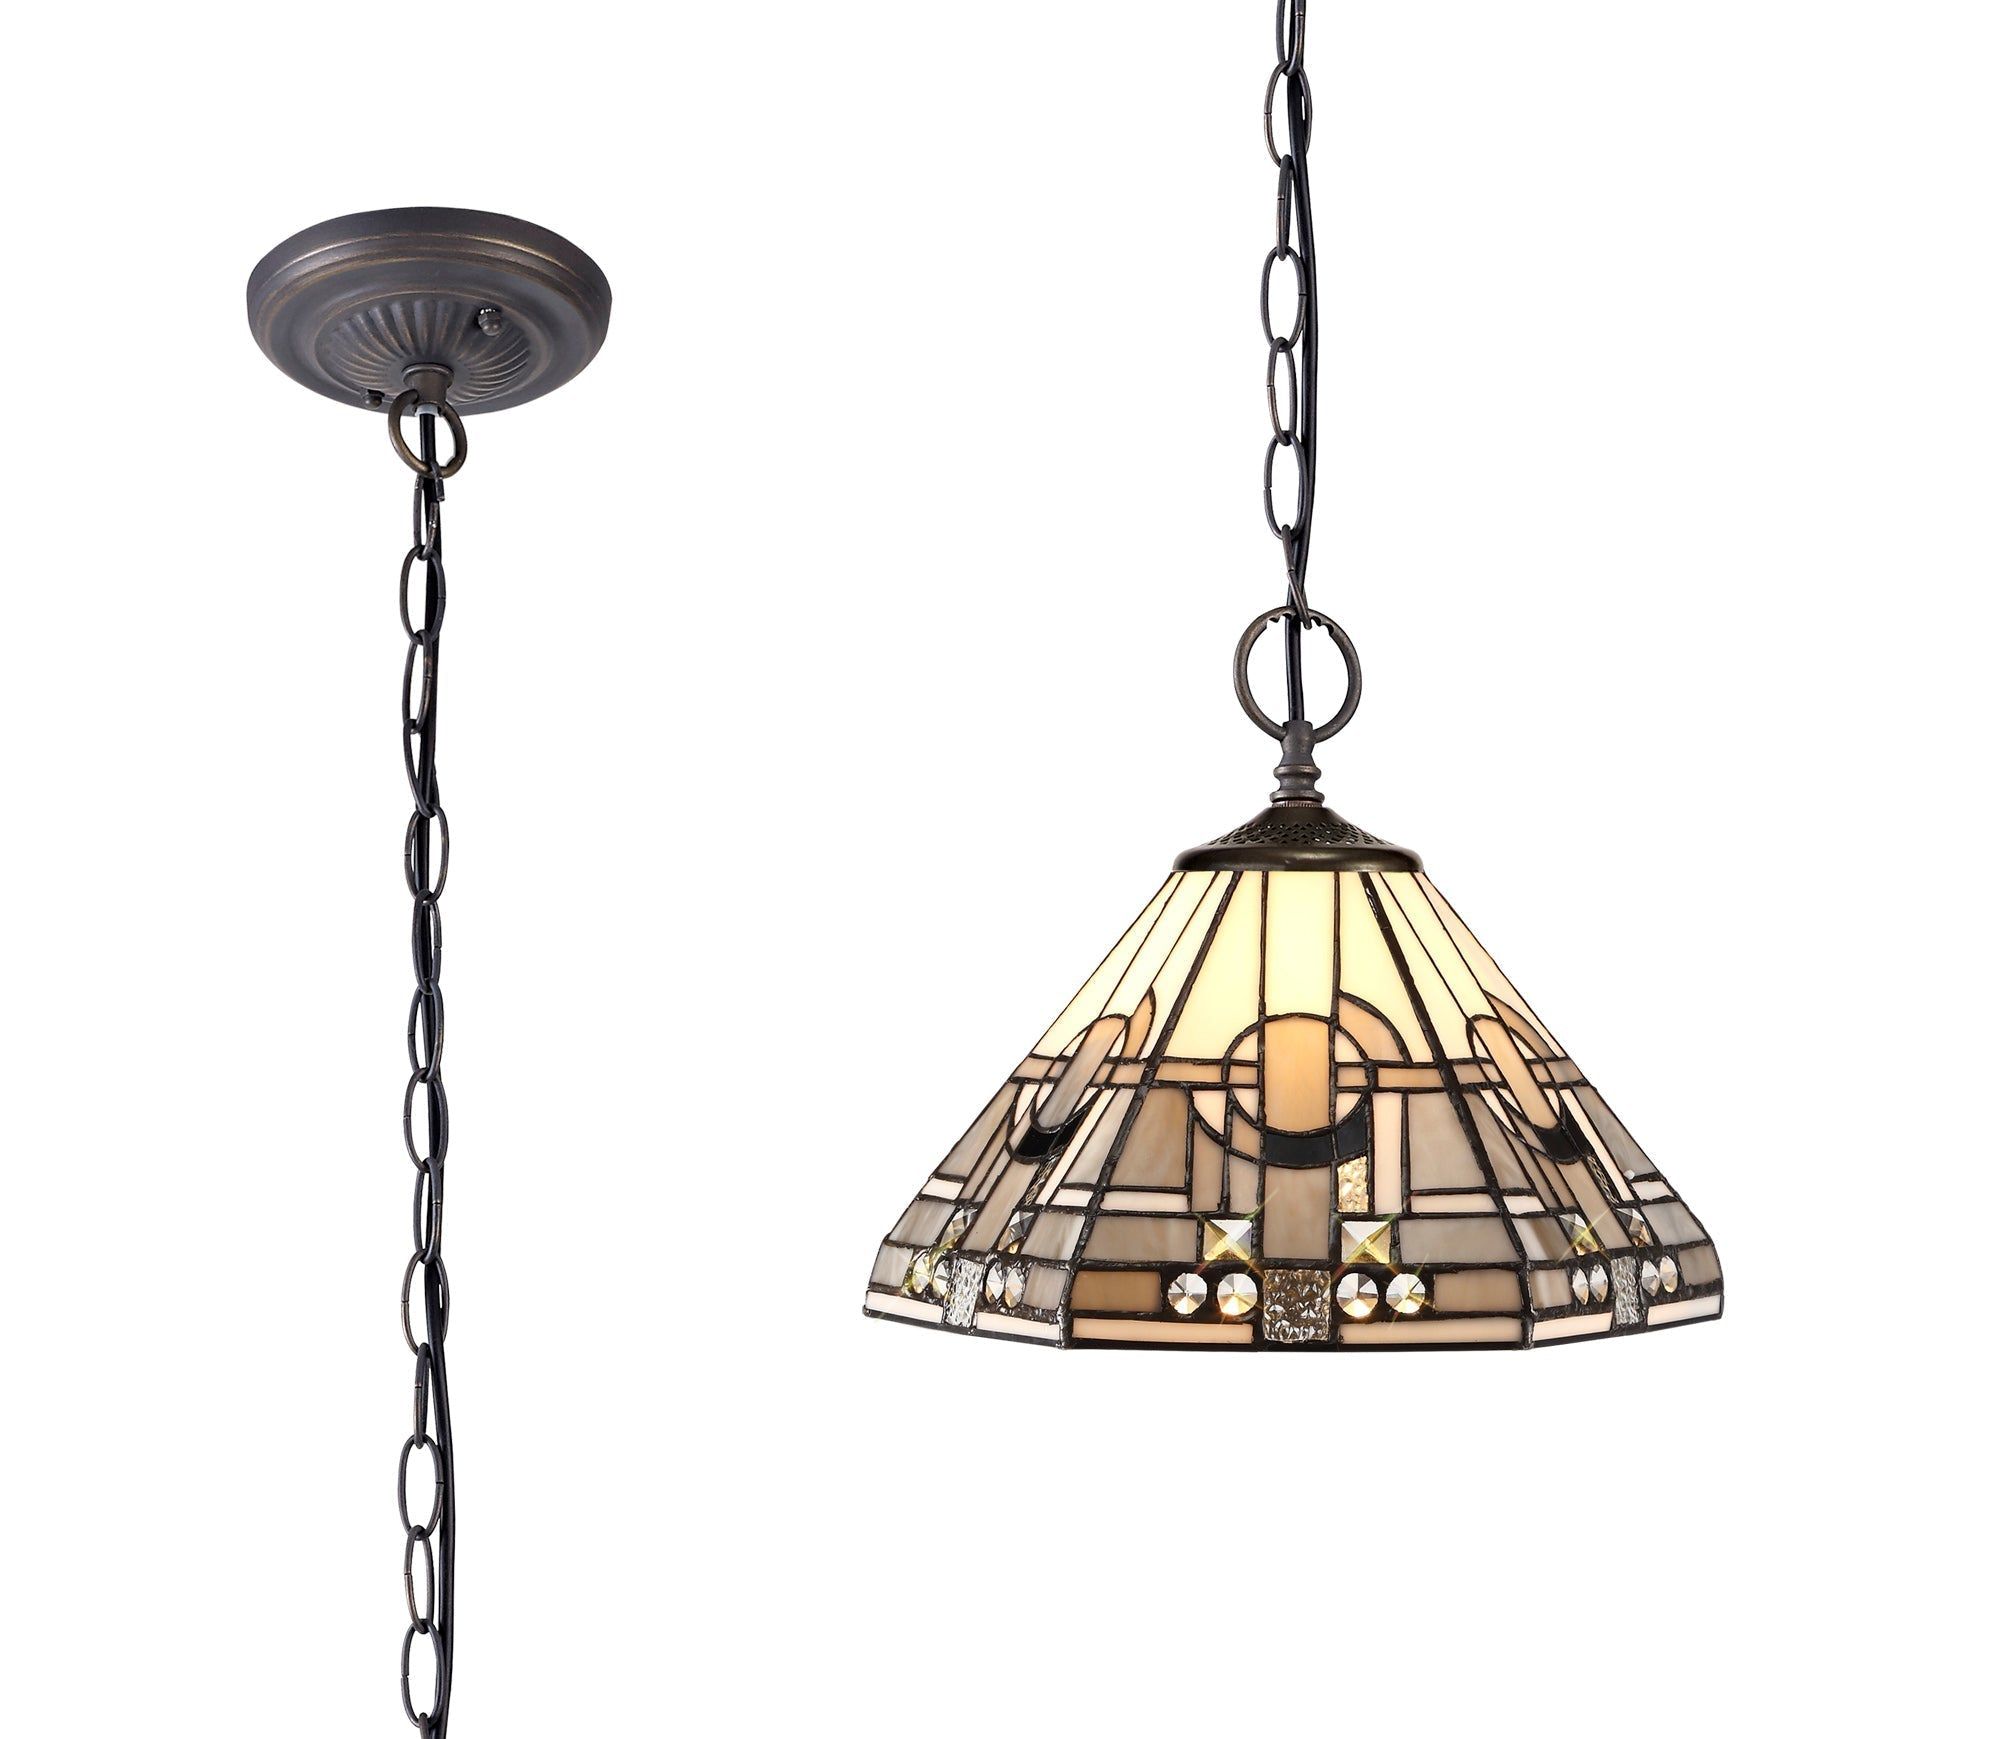 Guild 1/2/3 Light Downlighter Pendant E27 With 30/40cm Tiffany Shade, White/Grey/Black/Clear Crystal/Aged Antique Brass